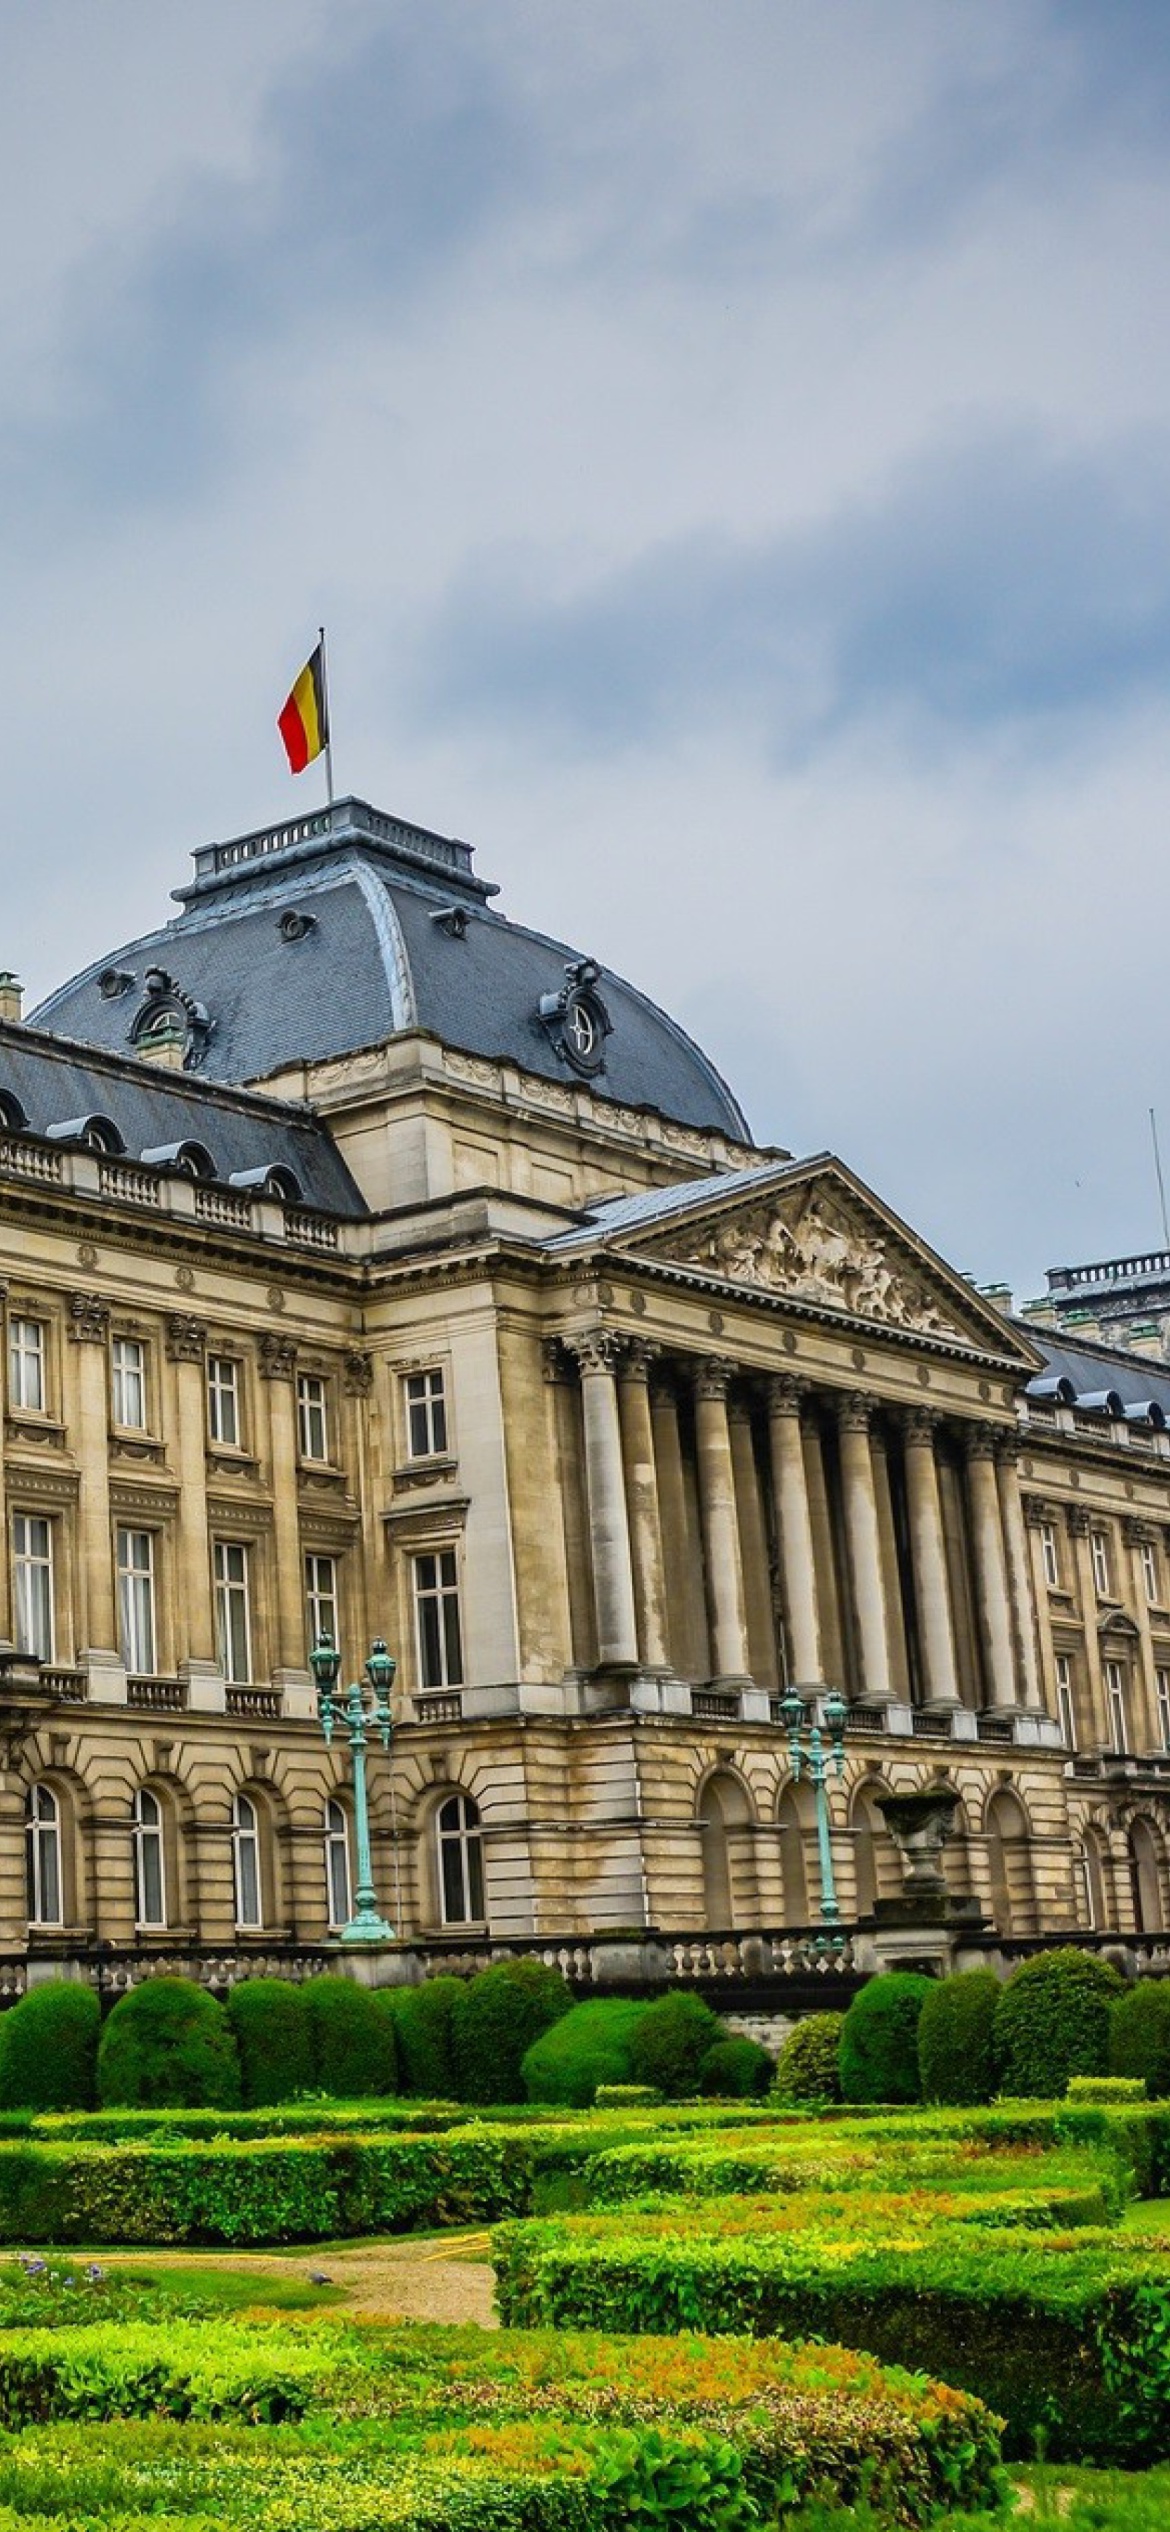 Royal Palace of Brussels wallpaper 1170x2532